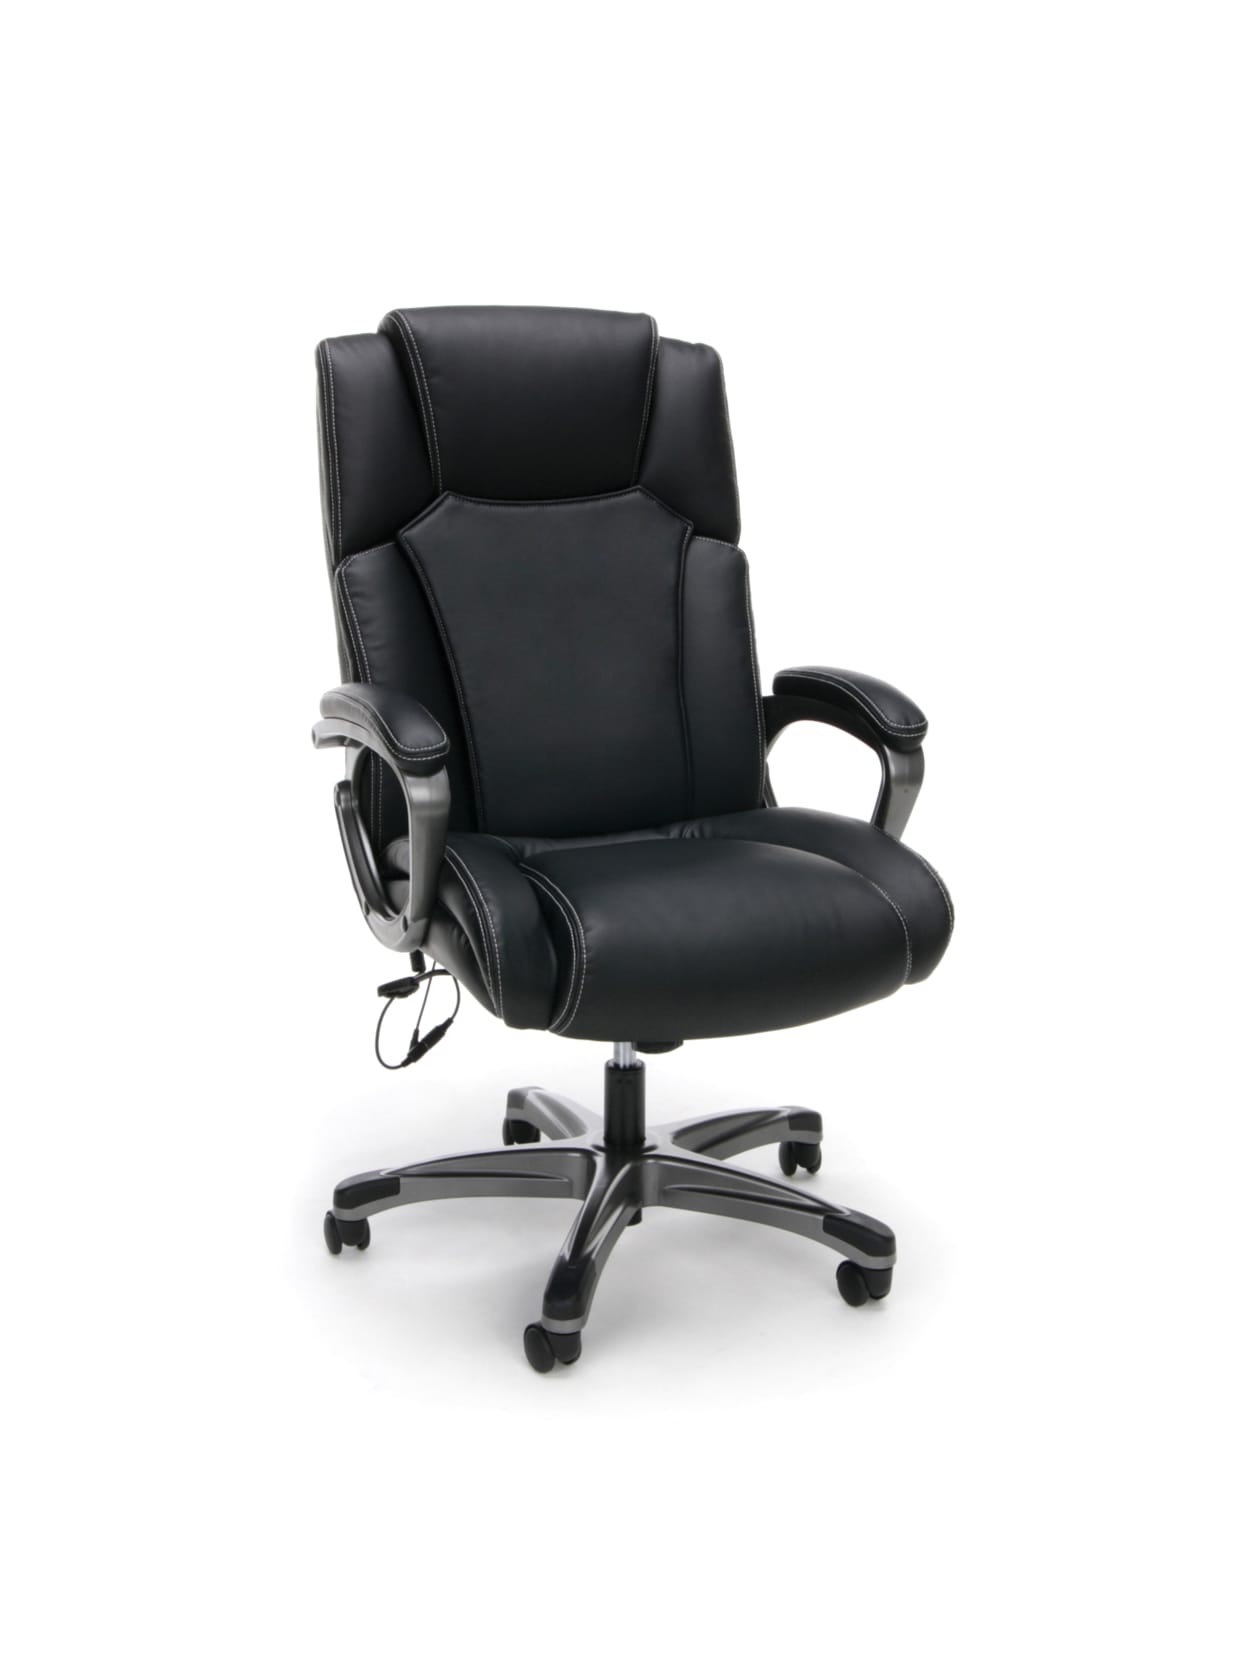 Essentials By Ofm Bonded Leather Shiatsu Heated Massage High Back Chair Black Office Depot